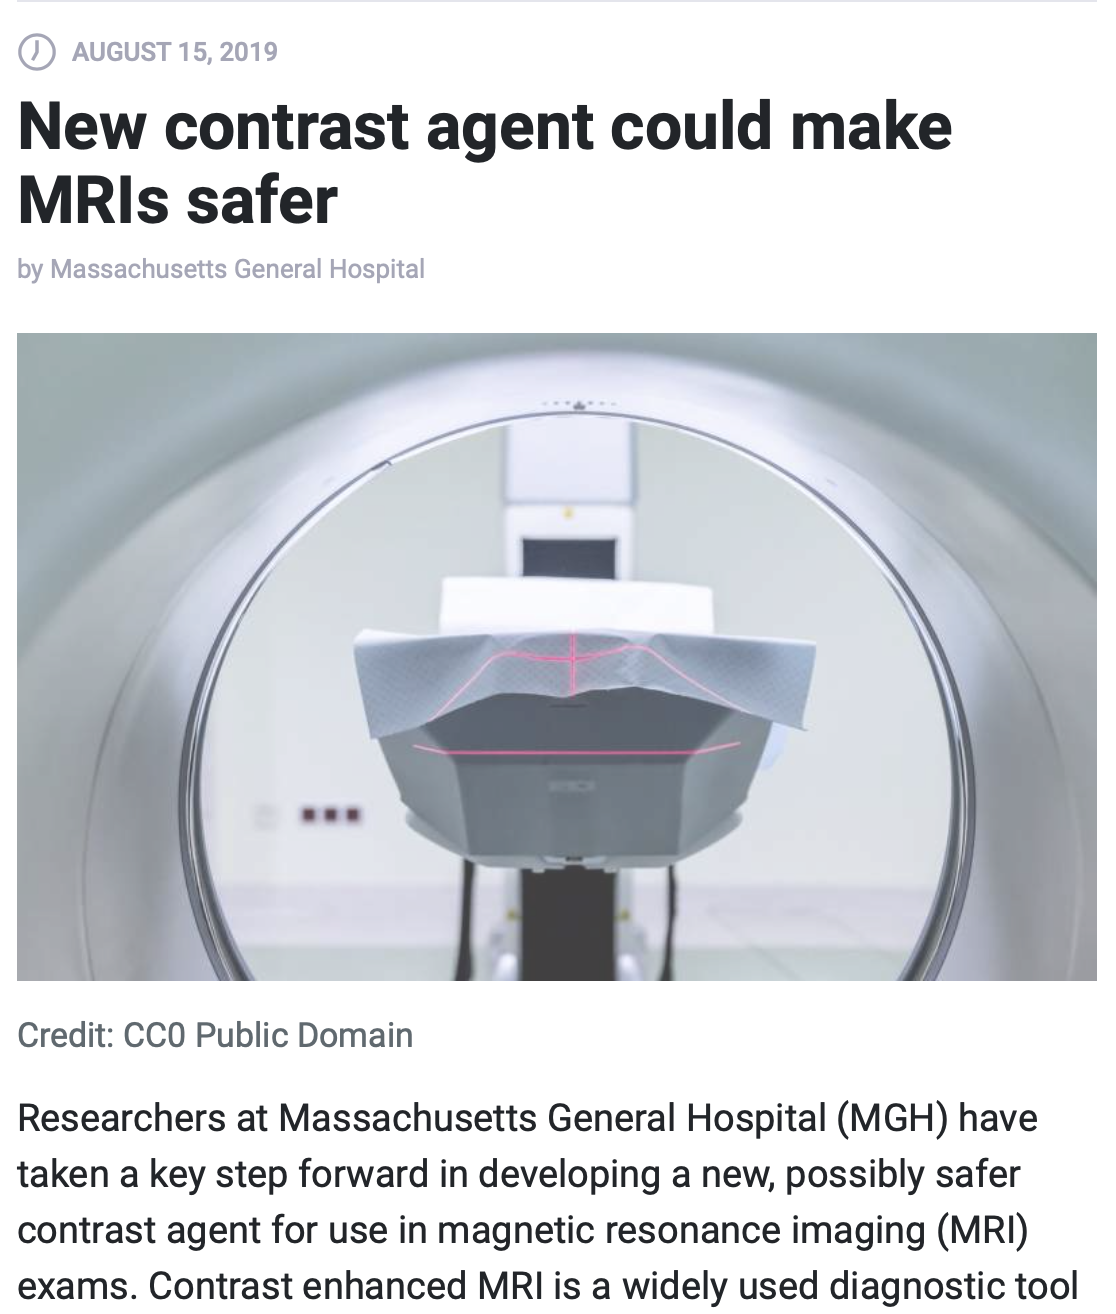 MGH: New contrast agent could make MRIs safer